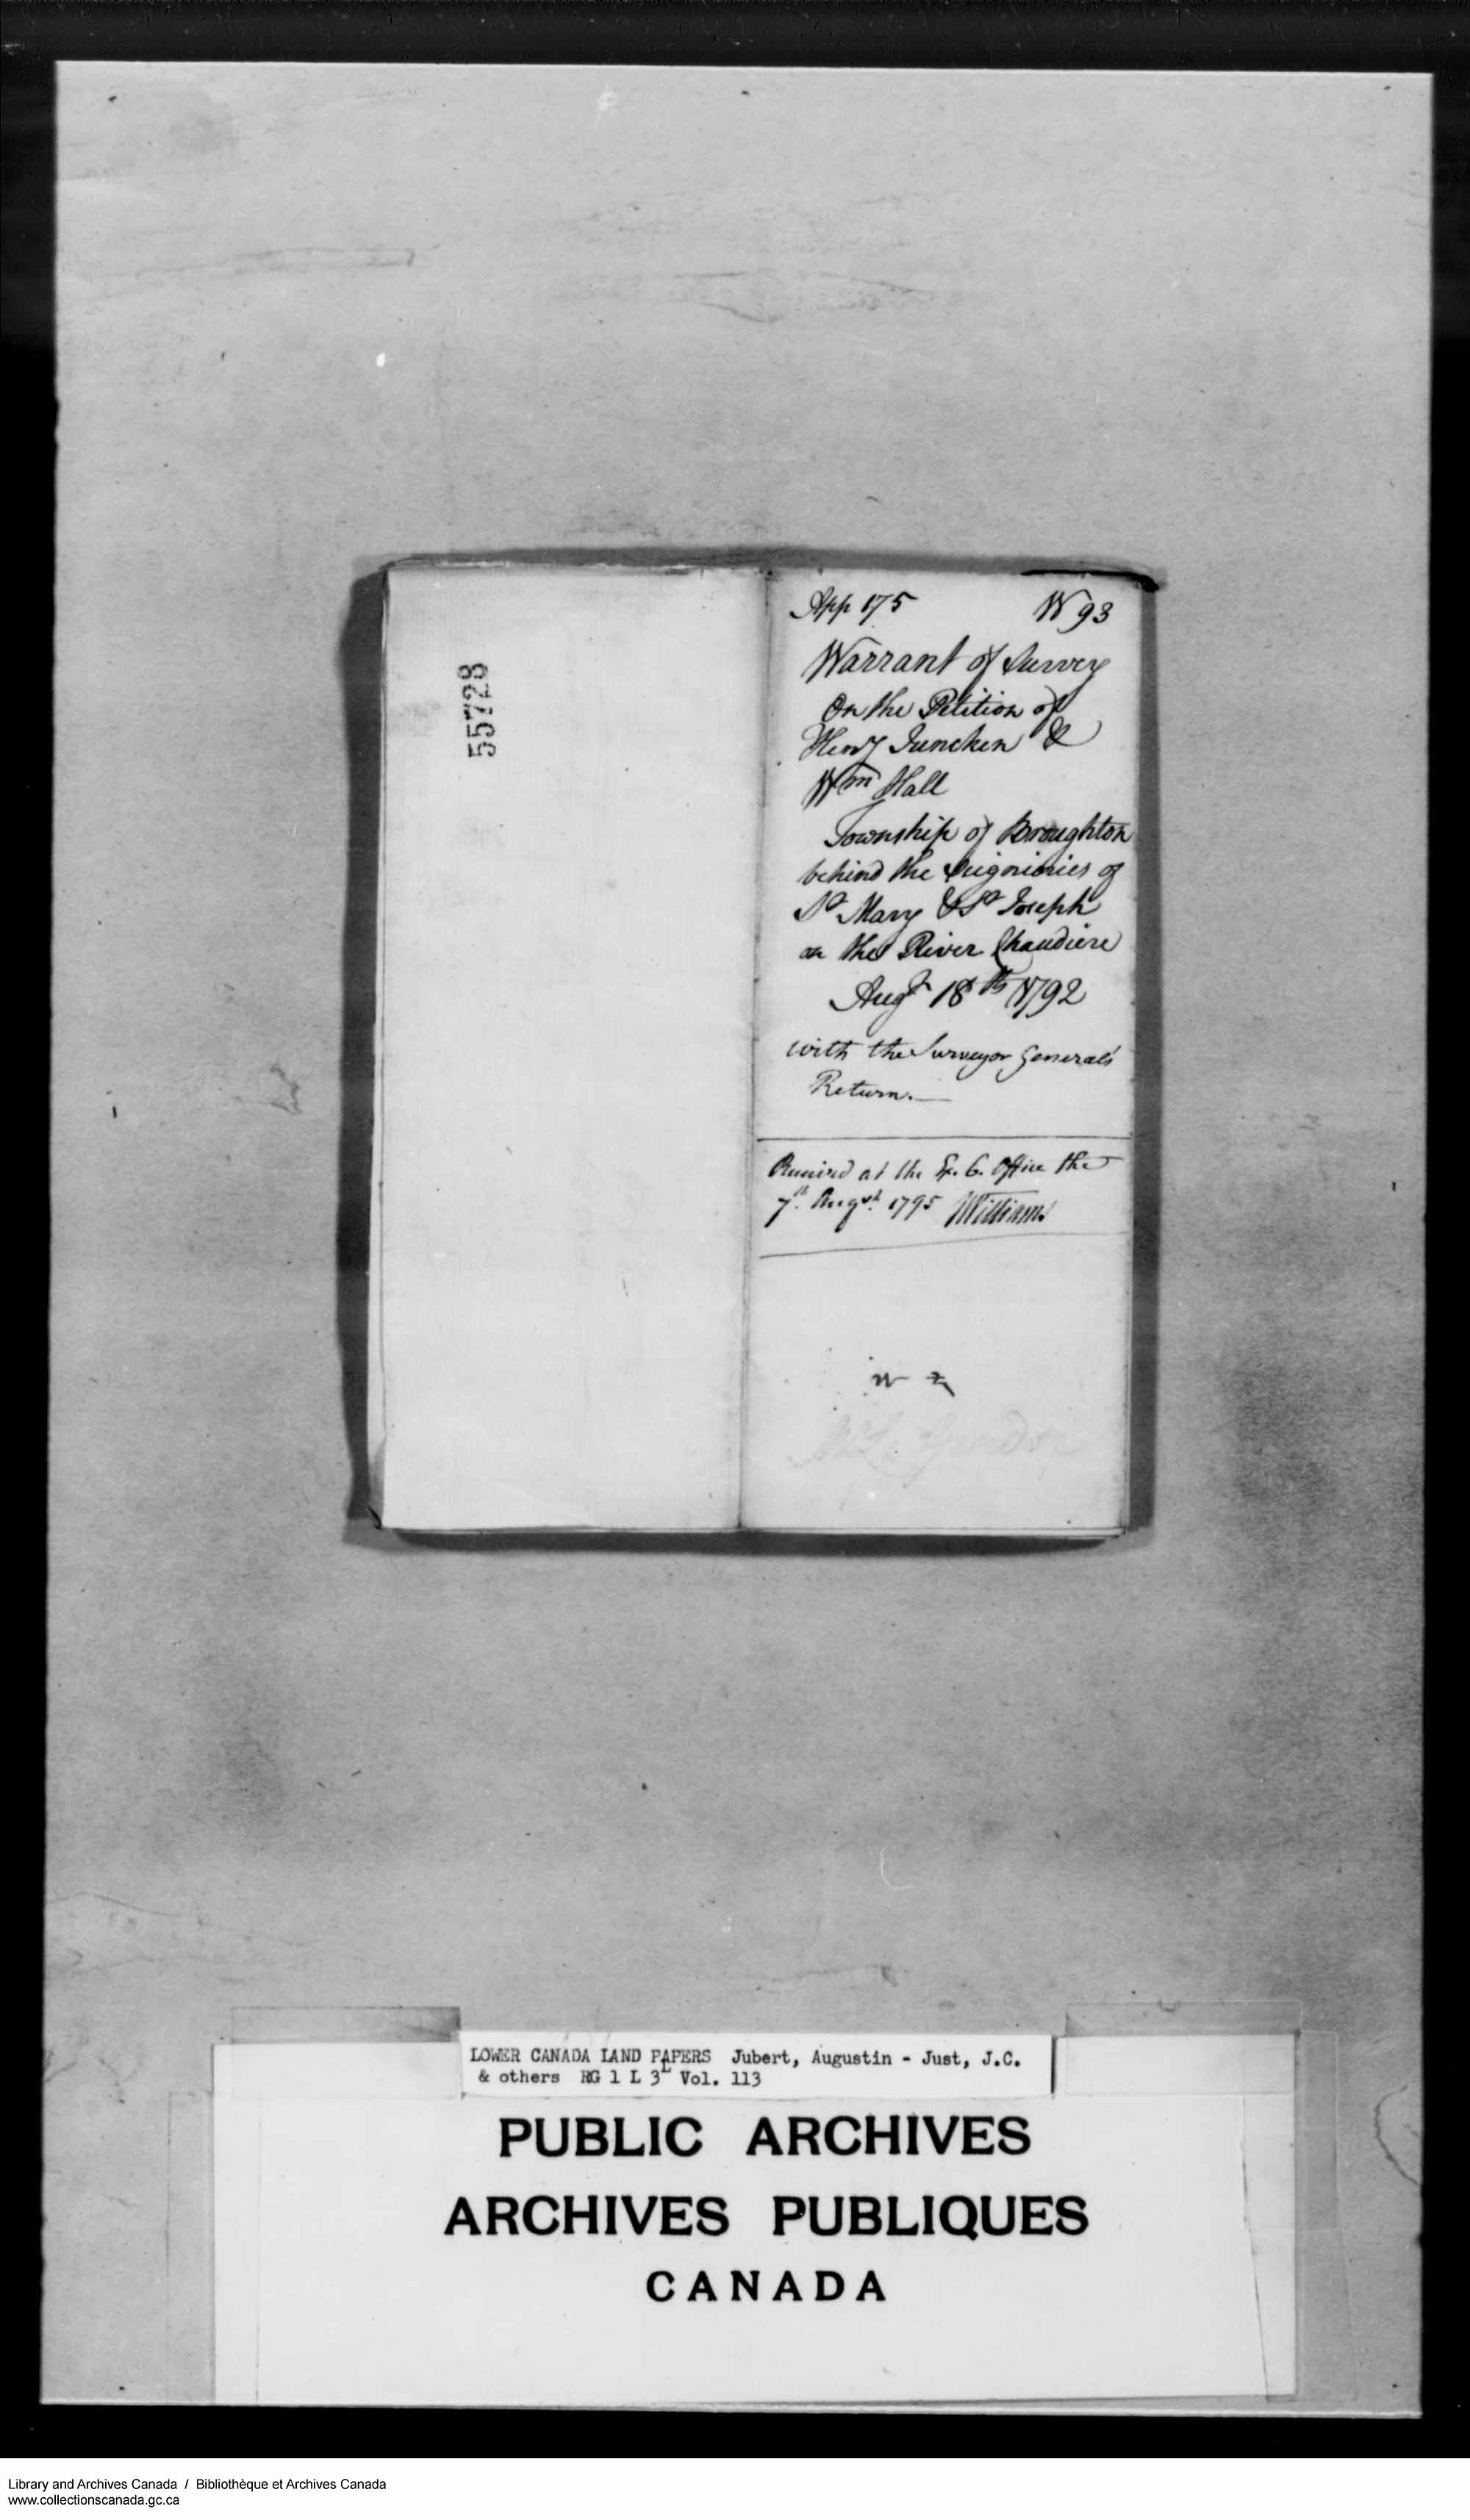 Digitized page of  for Image No.: e008700216